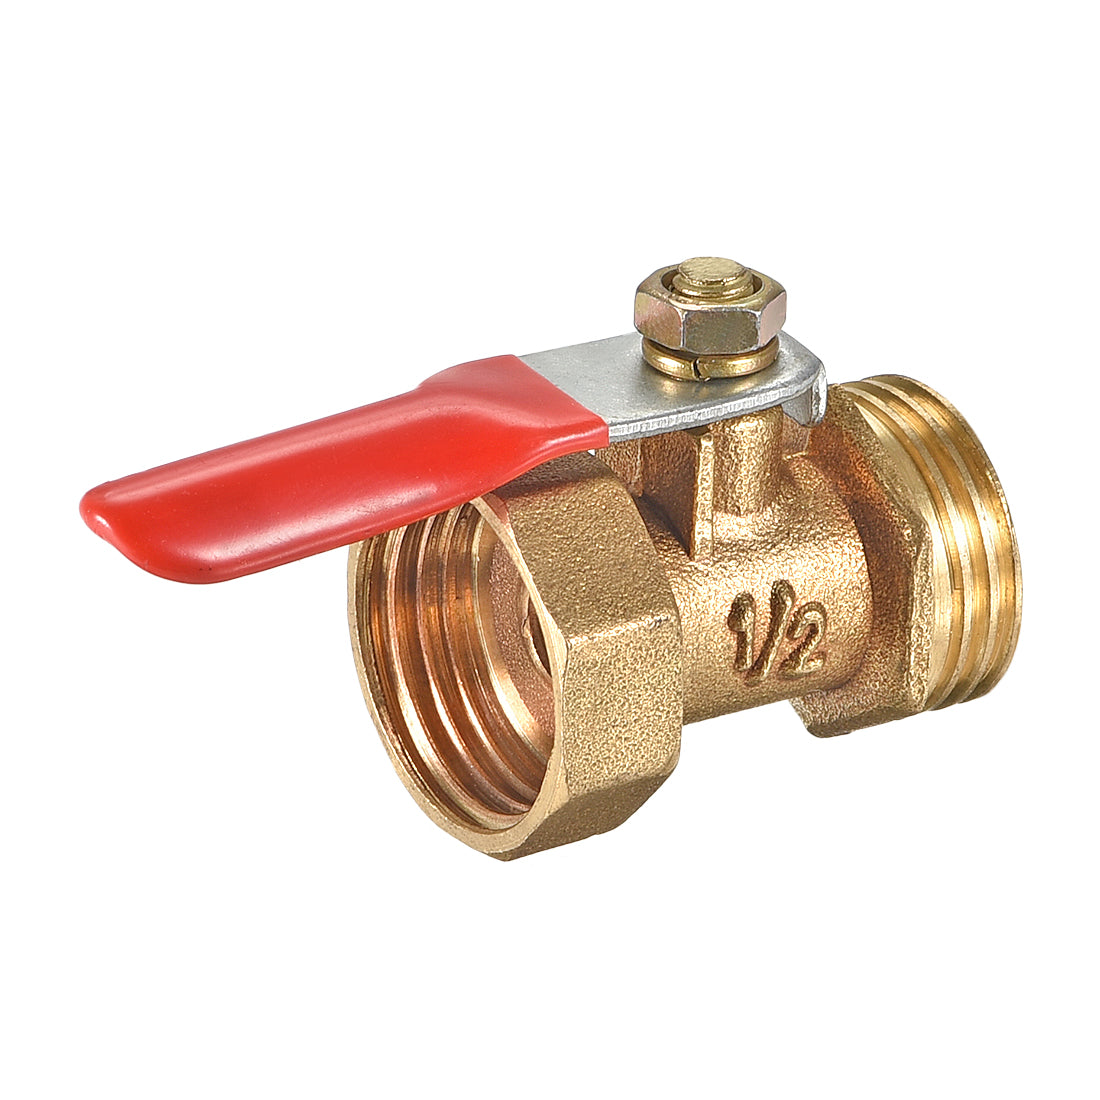 Uxcell Uxcell Brass Air Ball Valve Shut Off Switch G1/4 Male to Female Pipe accoupler